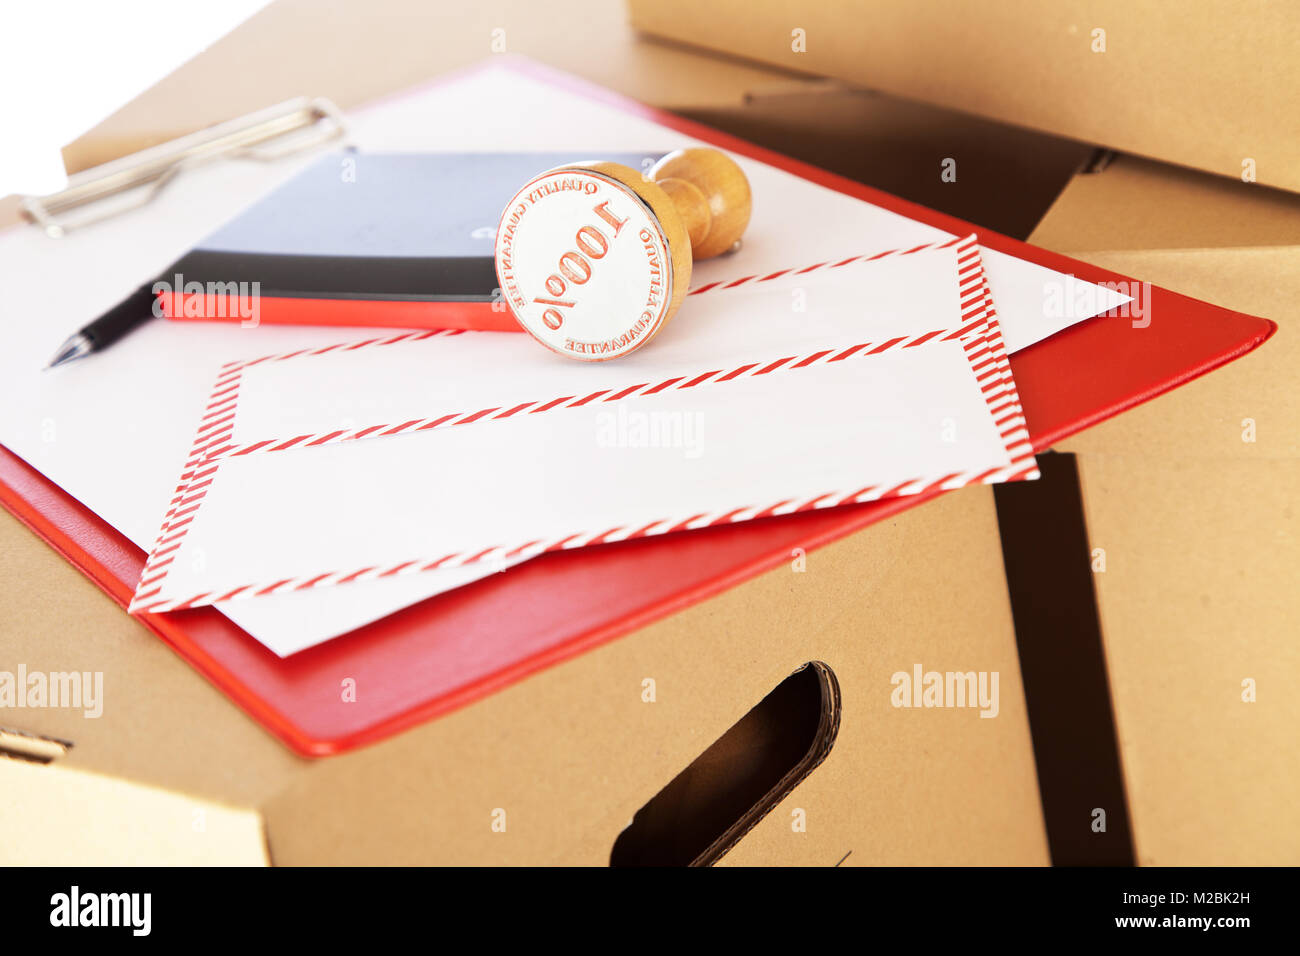 Mail envelope on cardboard boxes Stock Photo